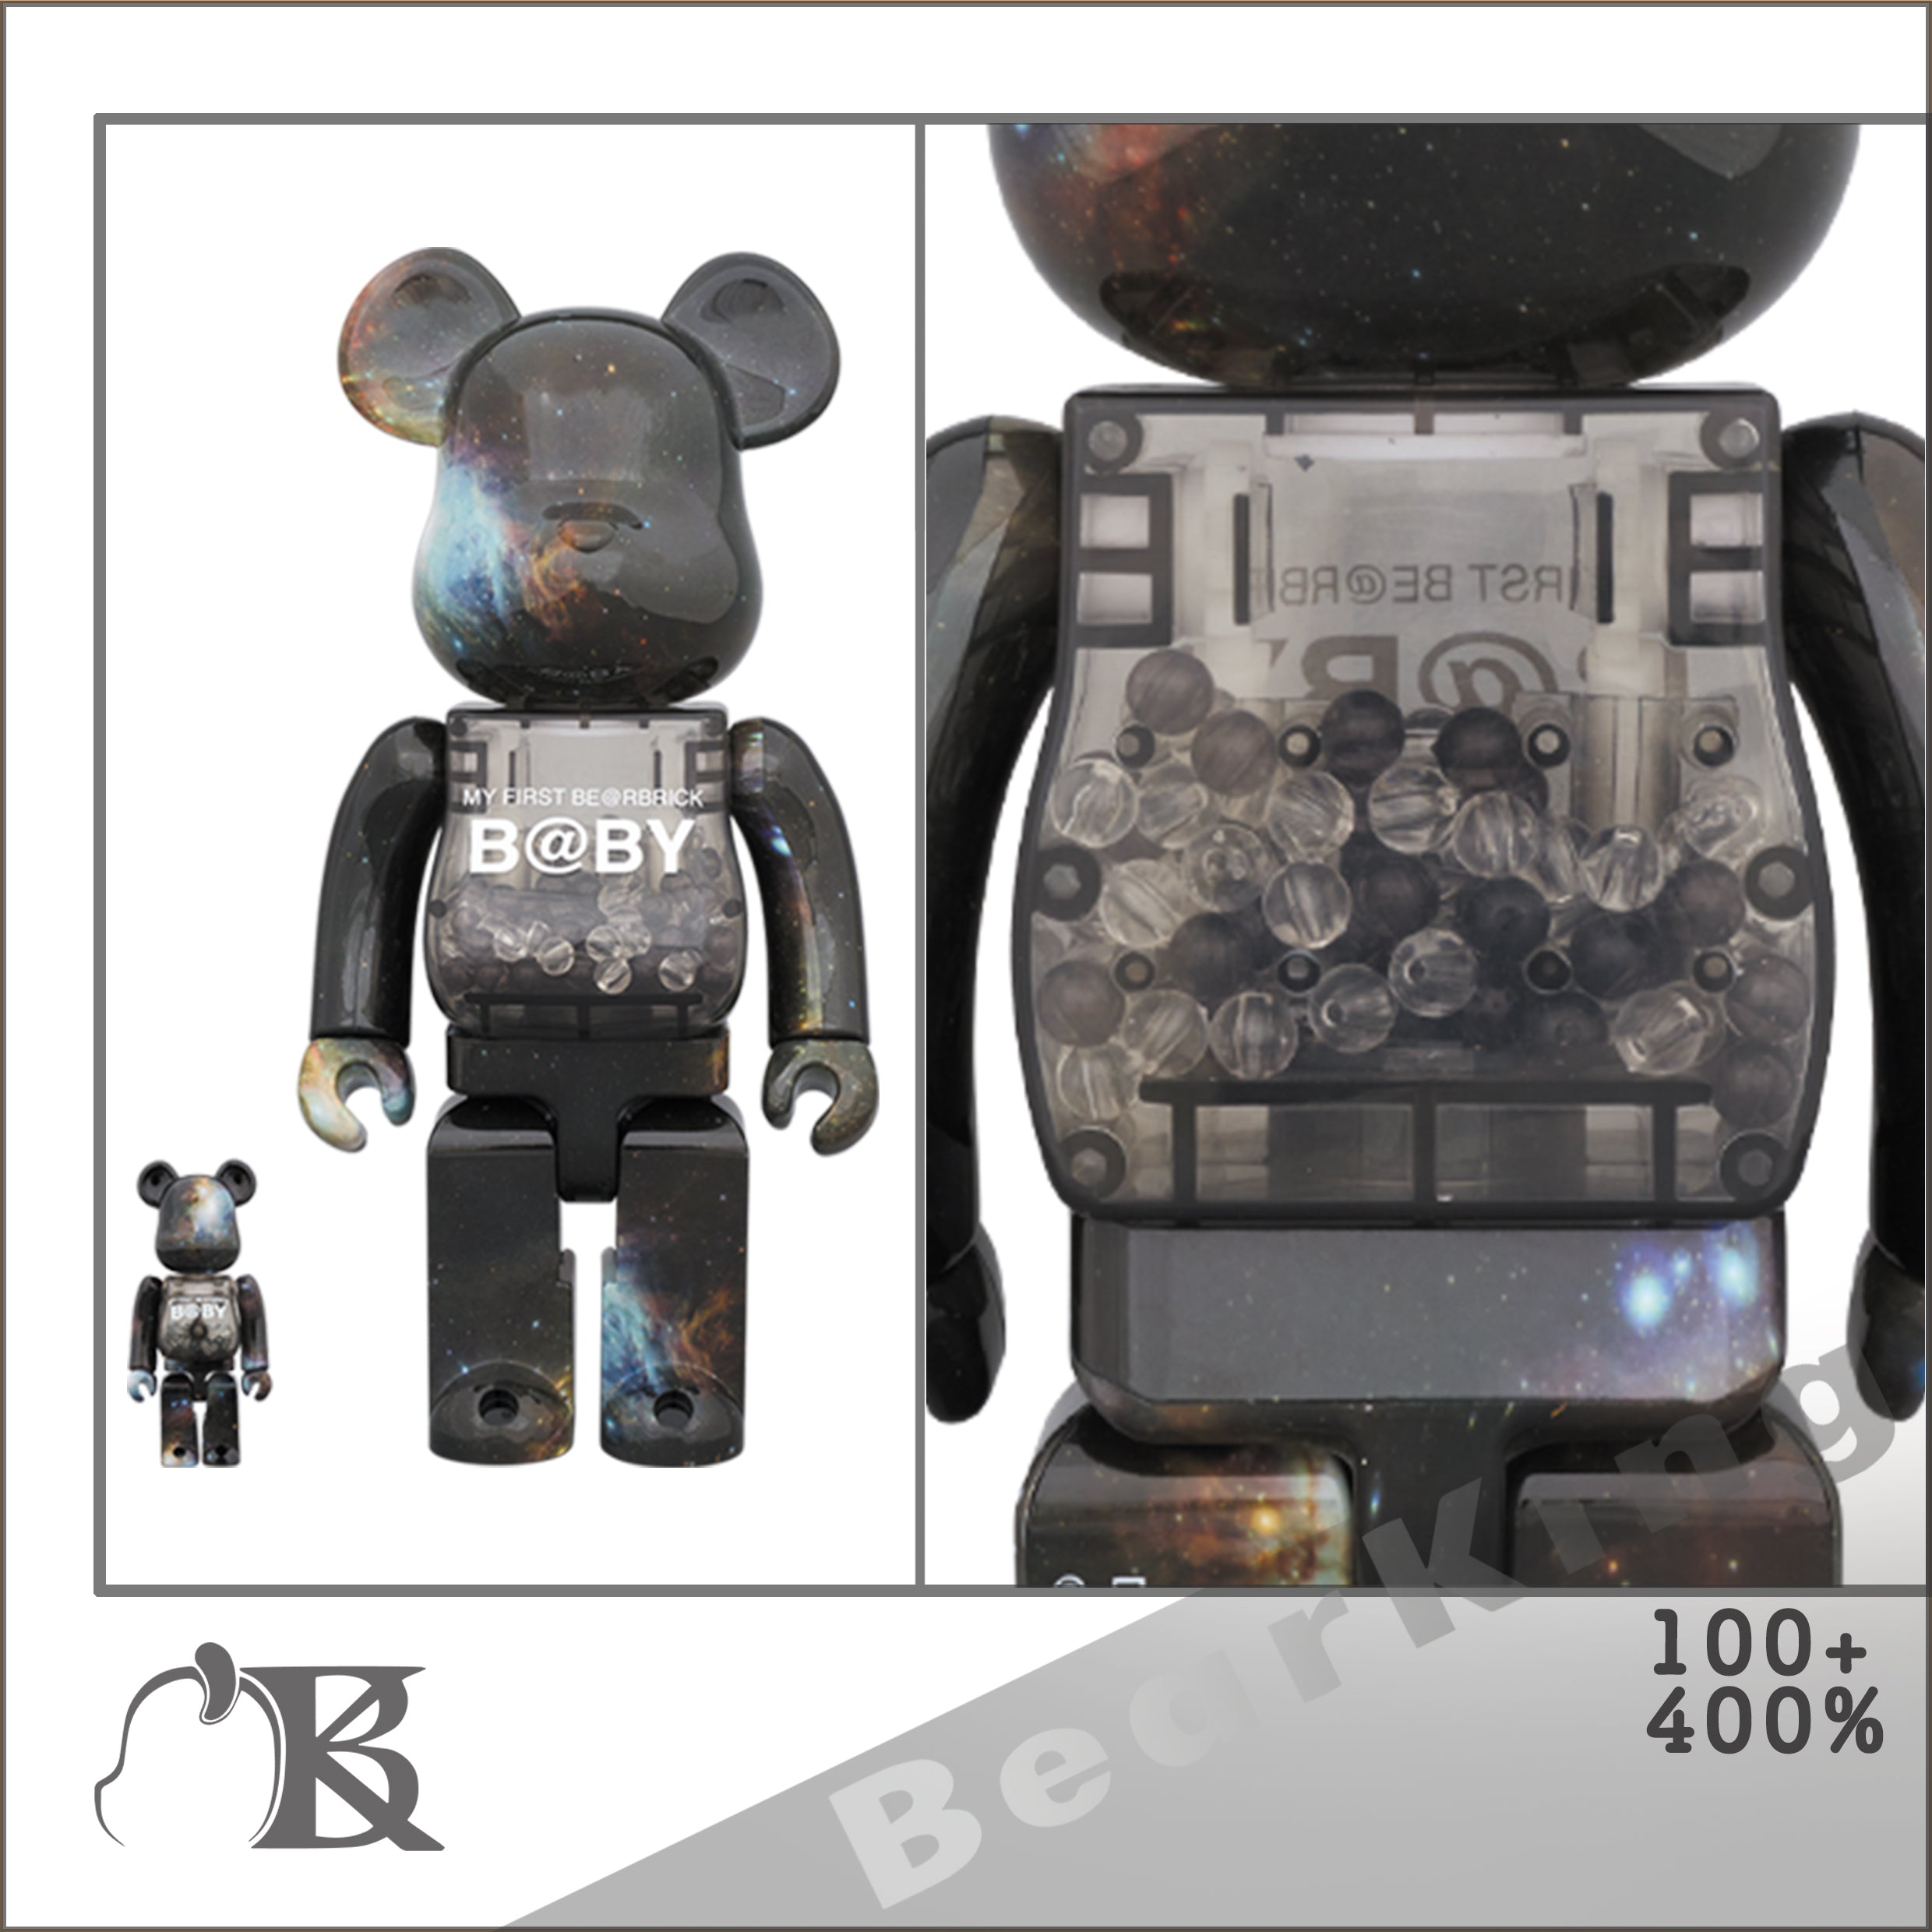 MY FIRST BE@RBRICK B@BY SPACE Ver.100％+400% 千秋Baby